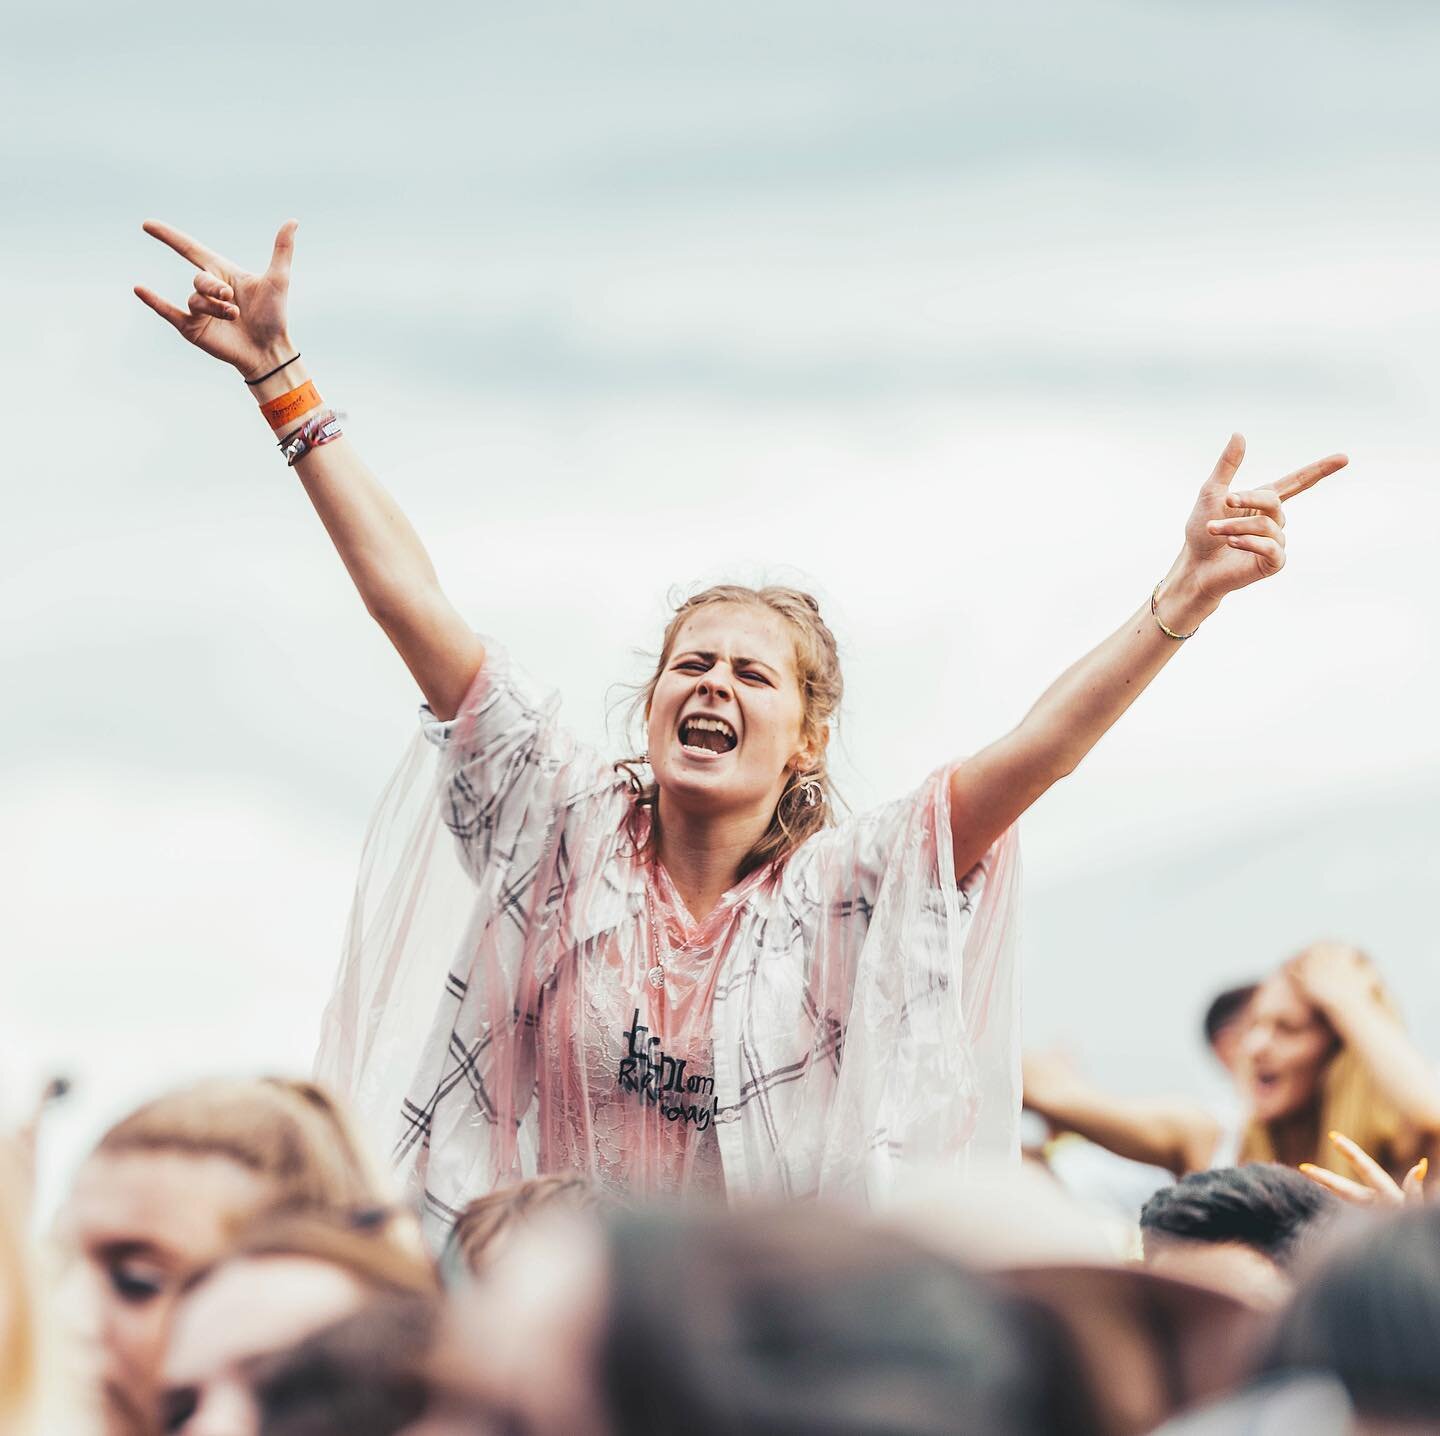 Me @ the weekend... 🙌🏼 @parklife_festival 2019 during @blossomsband 🌸

#parklife #parklifefestival #festivalphotography #blossoms #blossomsband